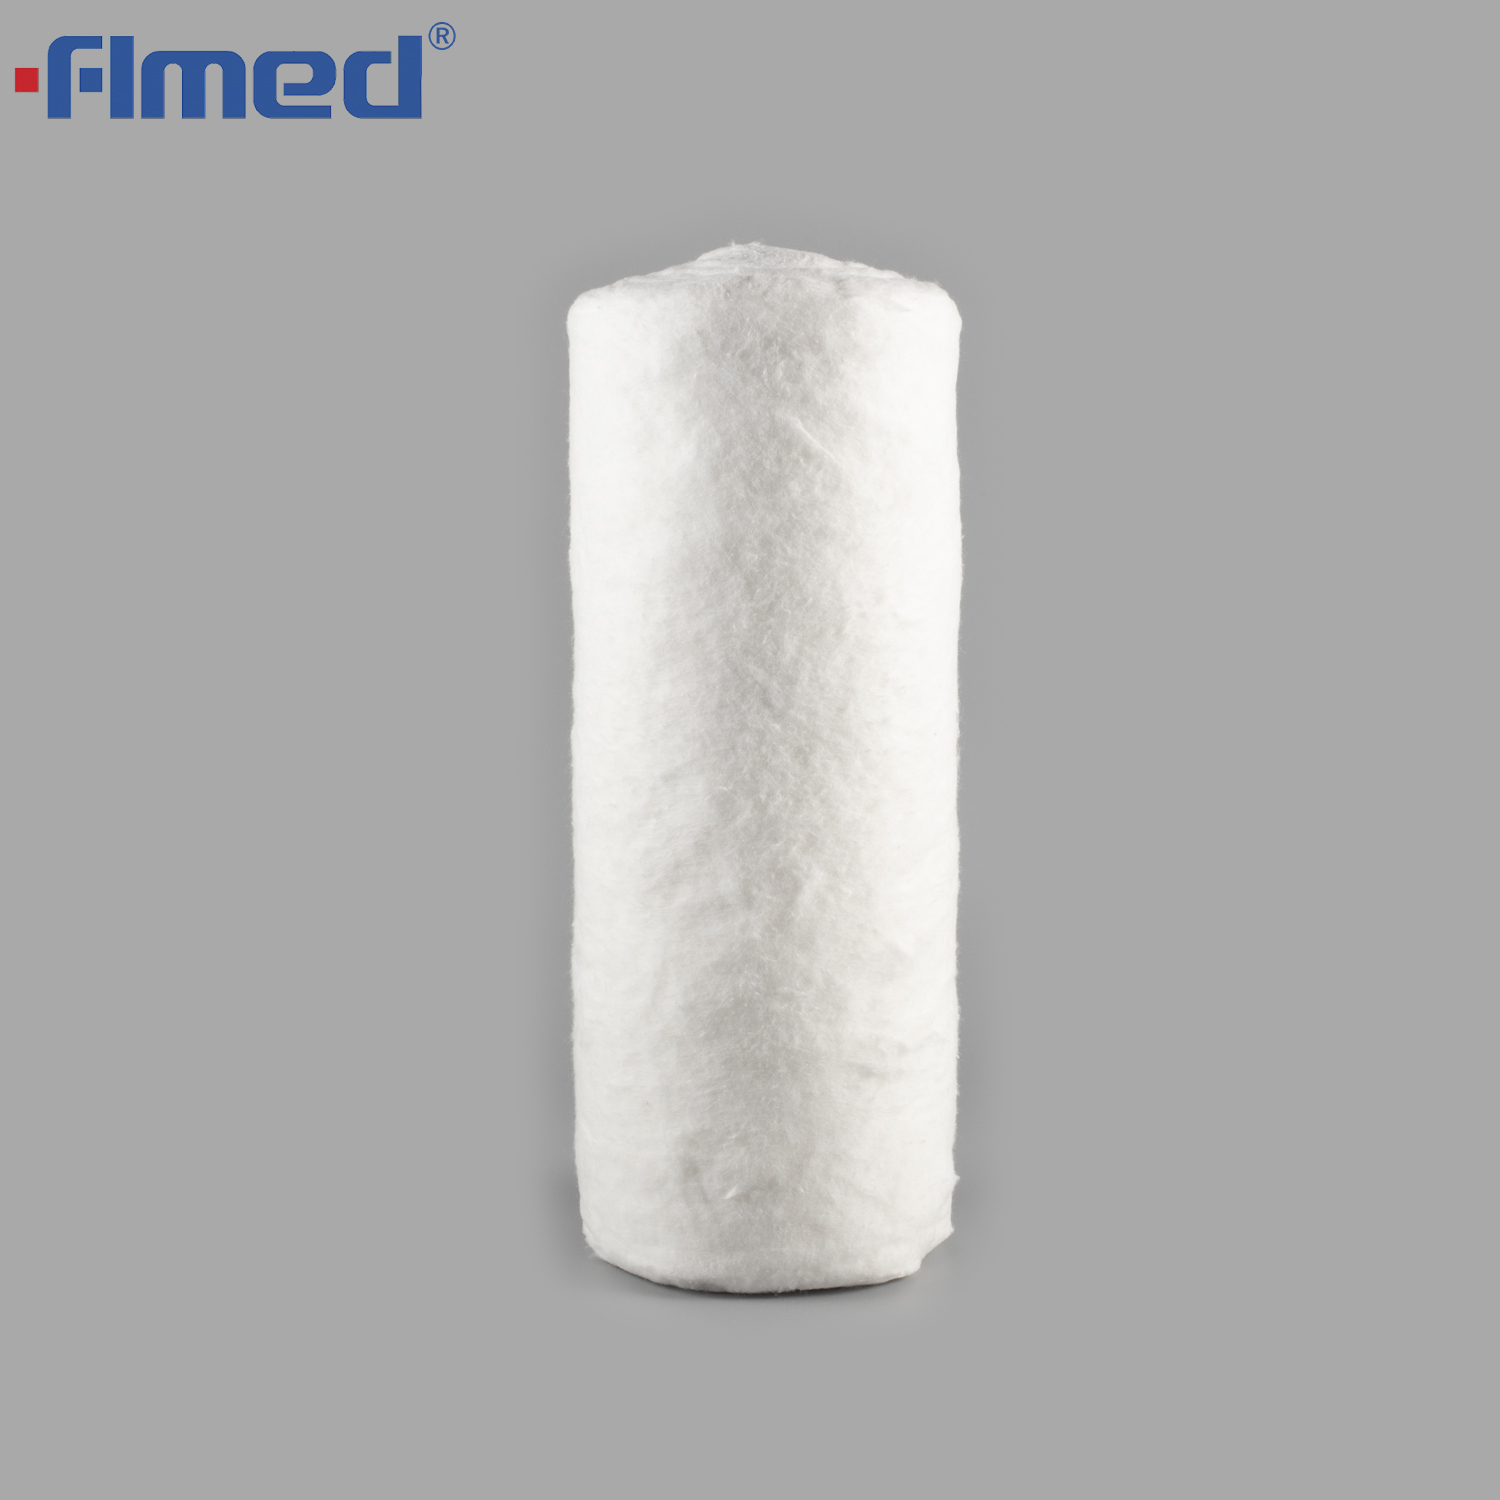 Cotton Wool Roll: From Bandaging to Padding, Its Many Uses